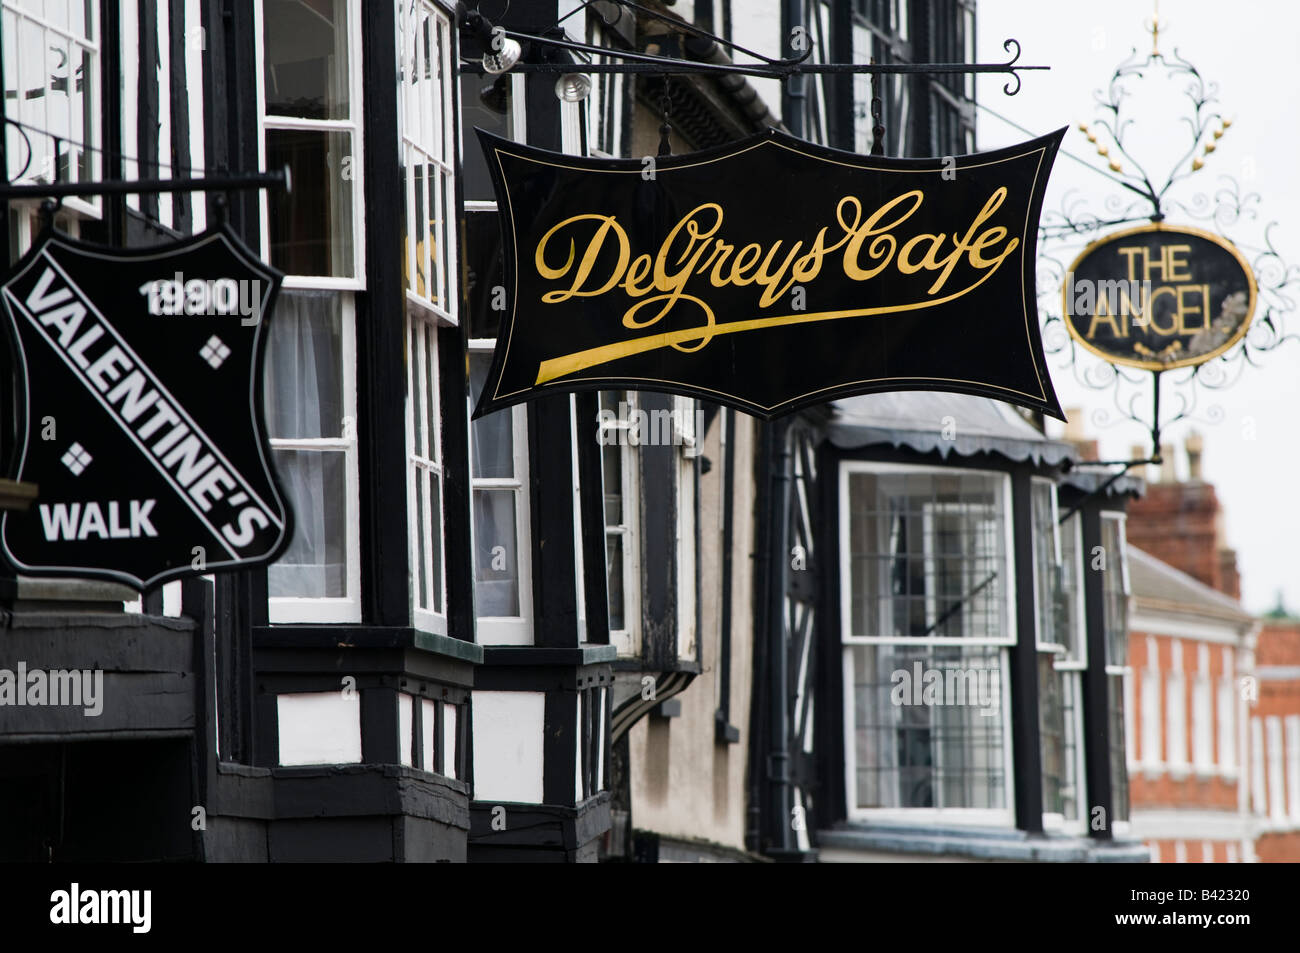 Sign for DeGreys cafe and other businesses in Ludlow town centre Shropshire England UK Stock Photo